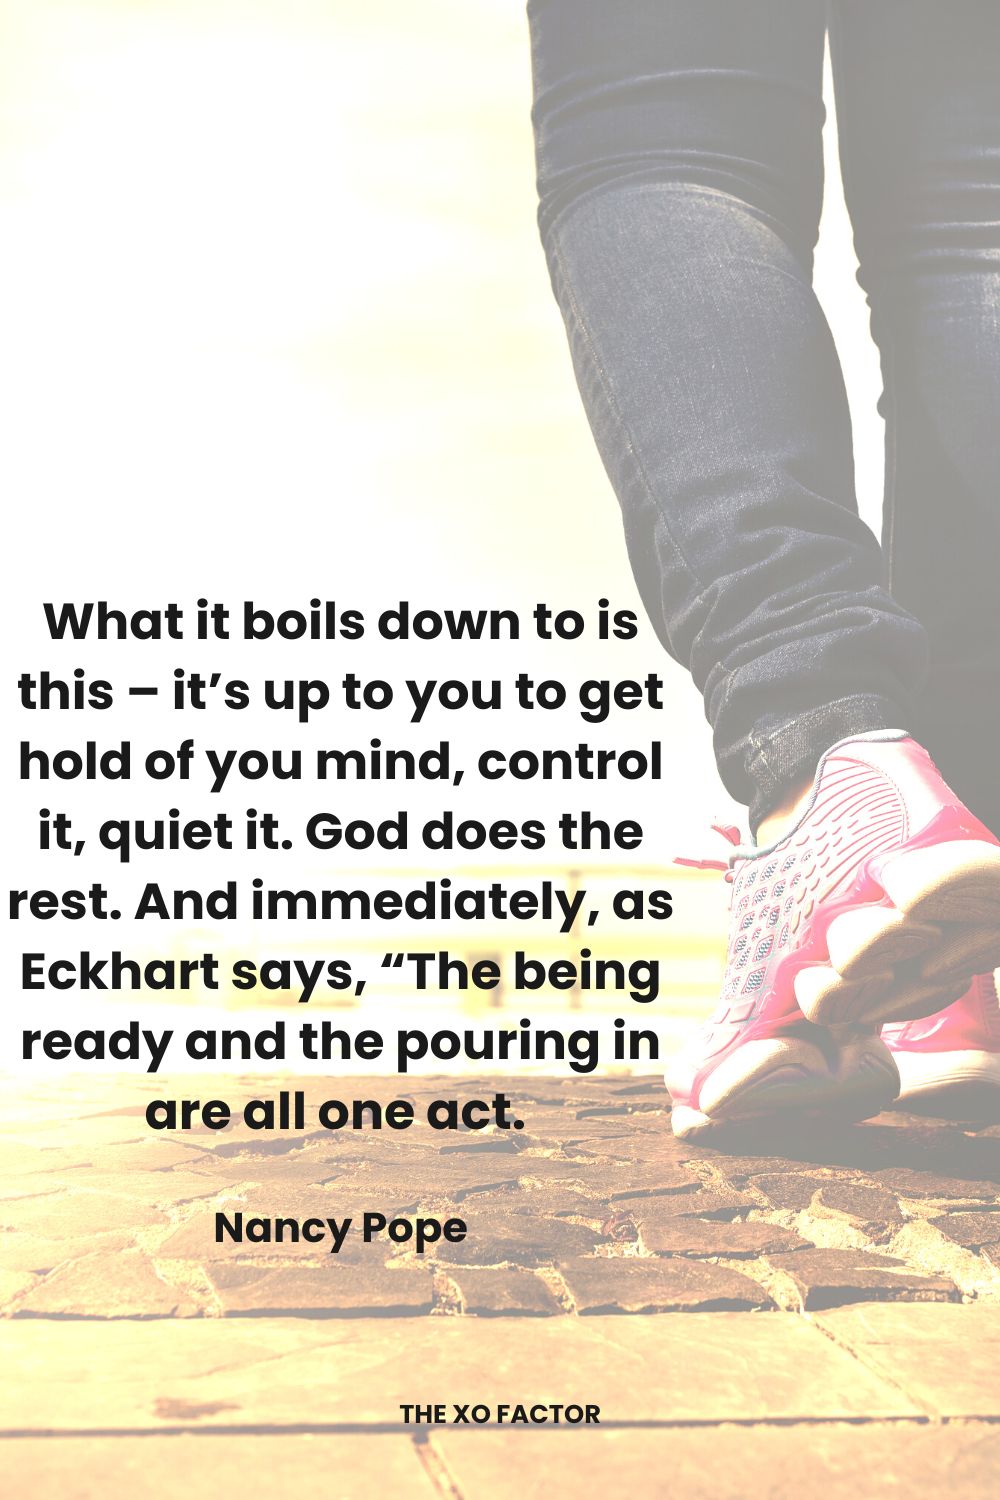 What it boils down to is this – it’s up to you to get hold of you mind, control  it, quiet it.  God does the rest.  And immediately, as Eckhart says, “The being ready and the pouring in are all one act. 